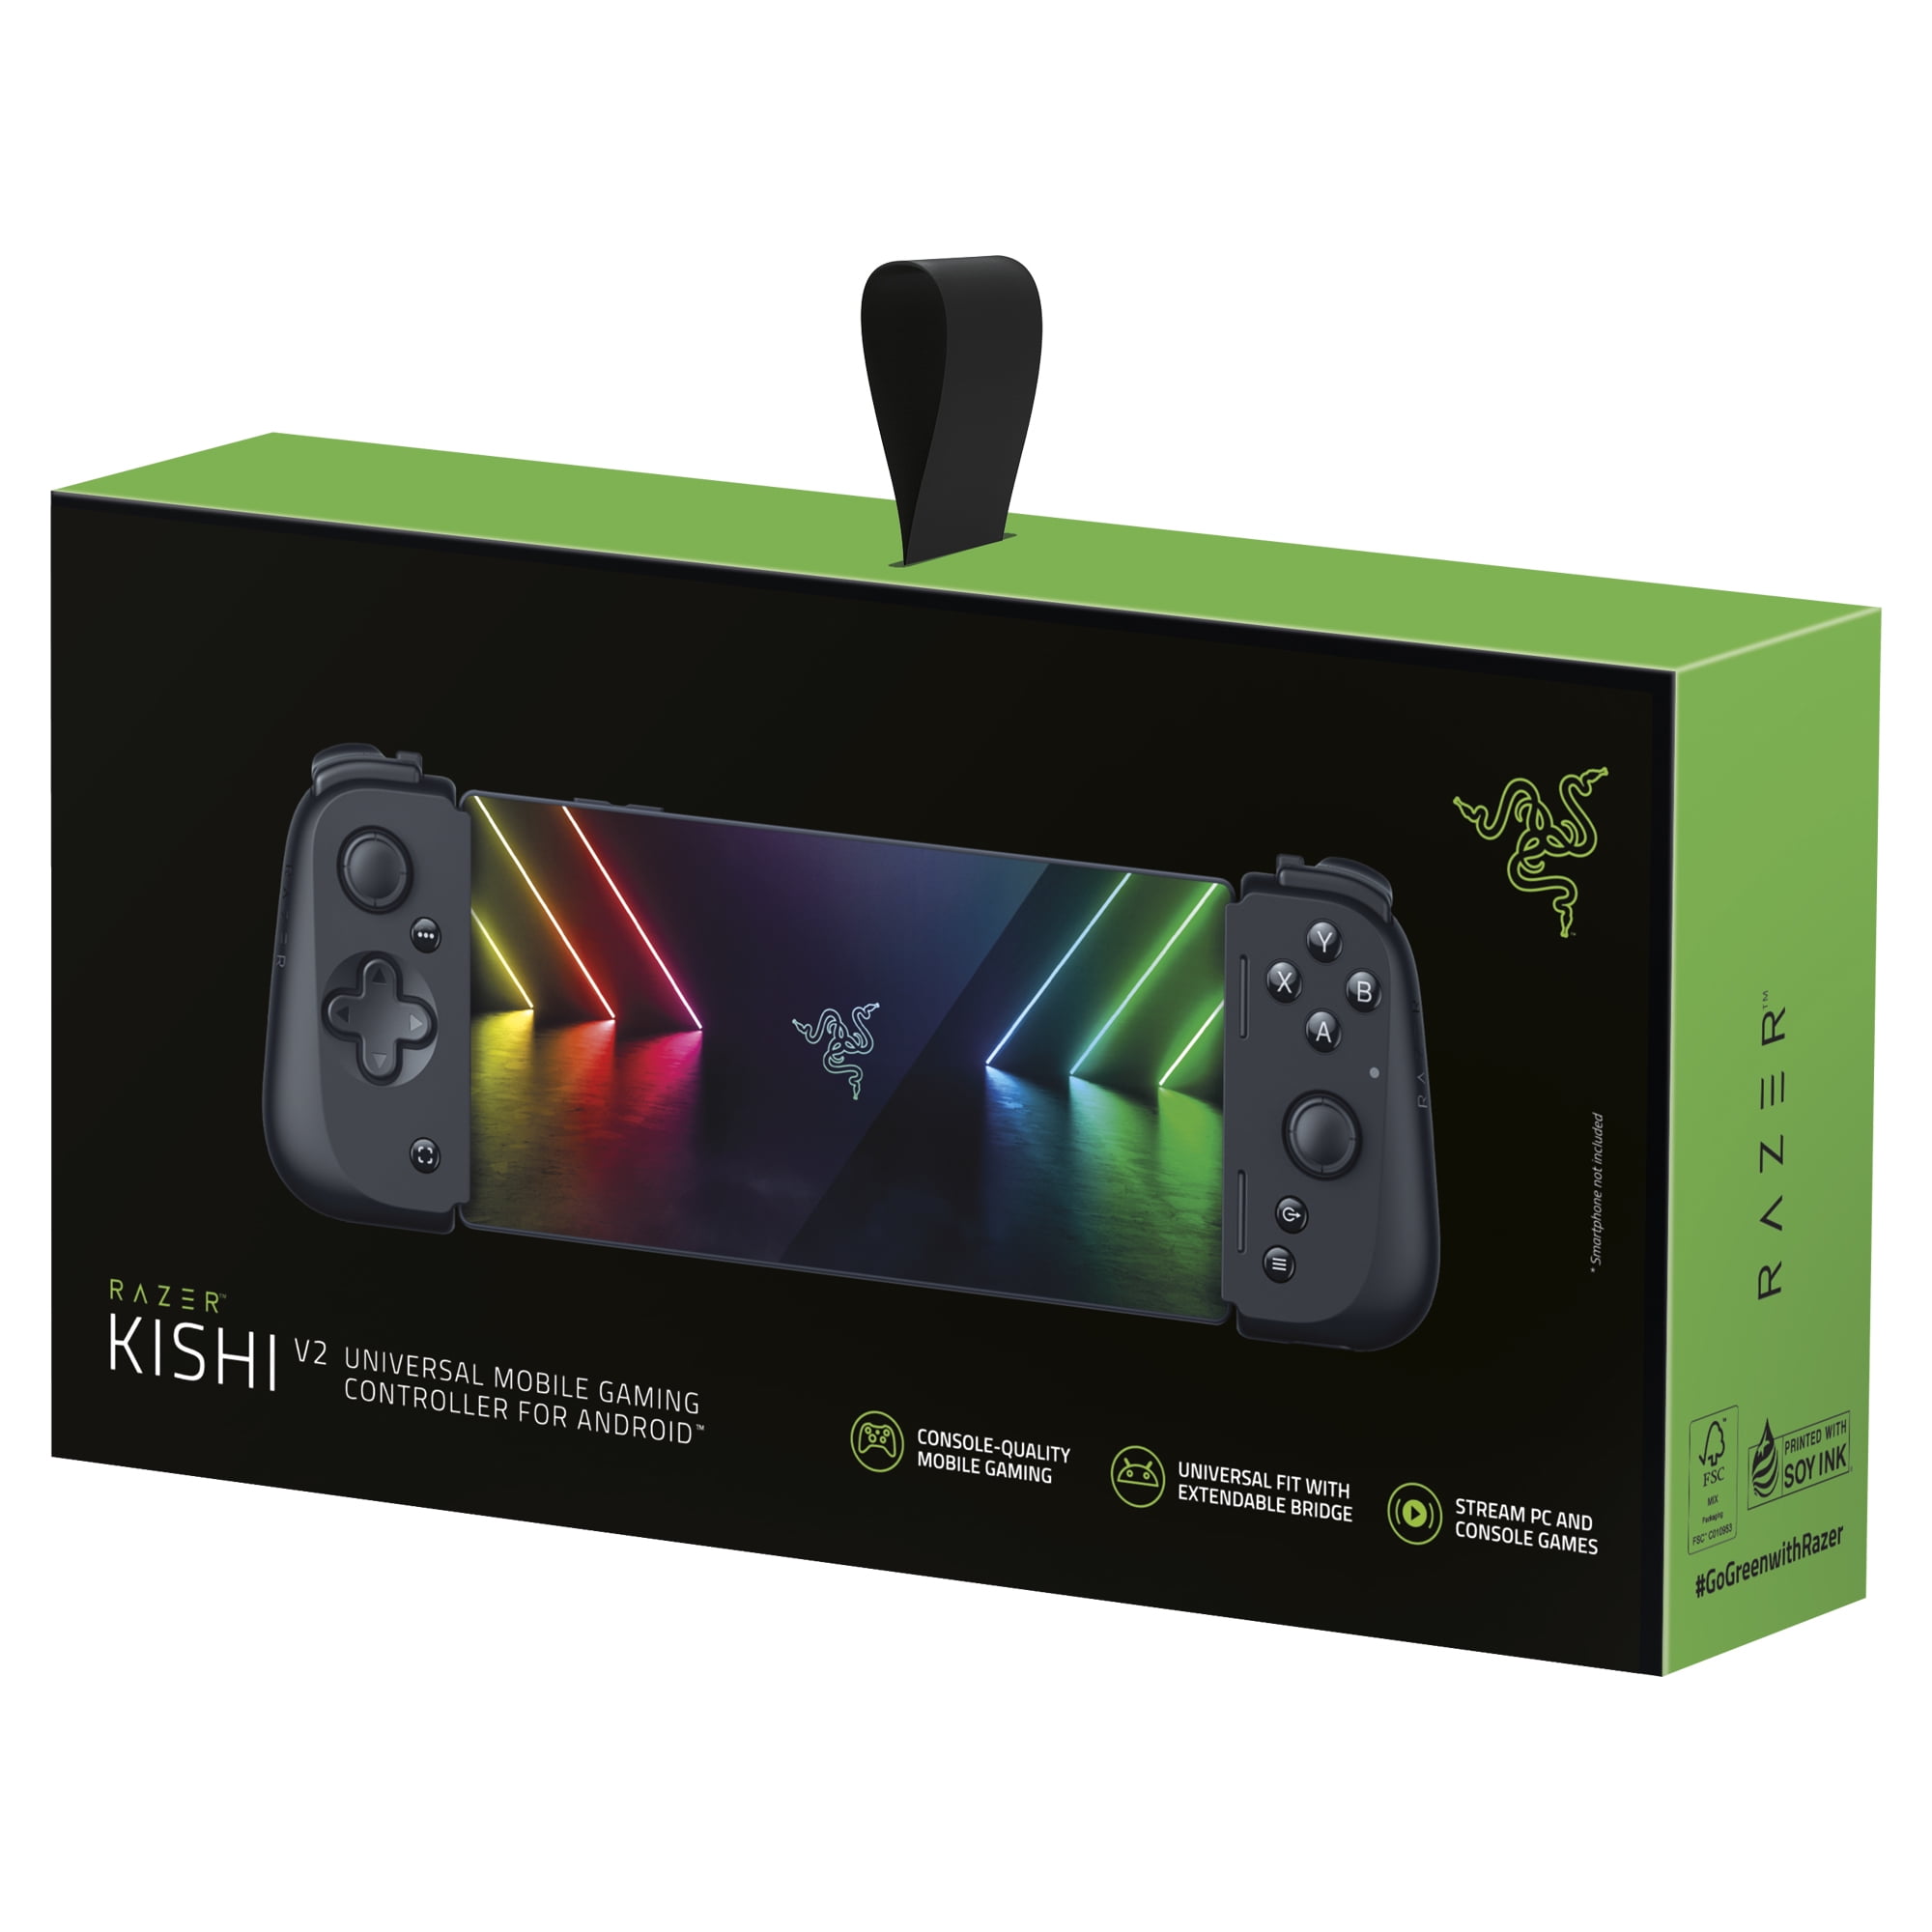 Razer Kishi V2 Mobile Gaming Controller for Android, Console Quality Gaming  Controls, Universal Fit, Stream PC, Xbox, PlayStation Games, Ultra Low 